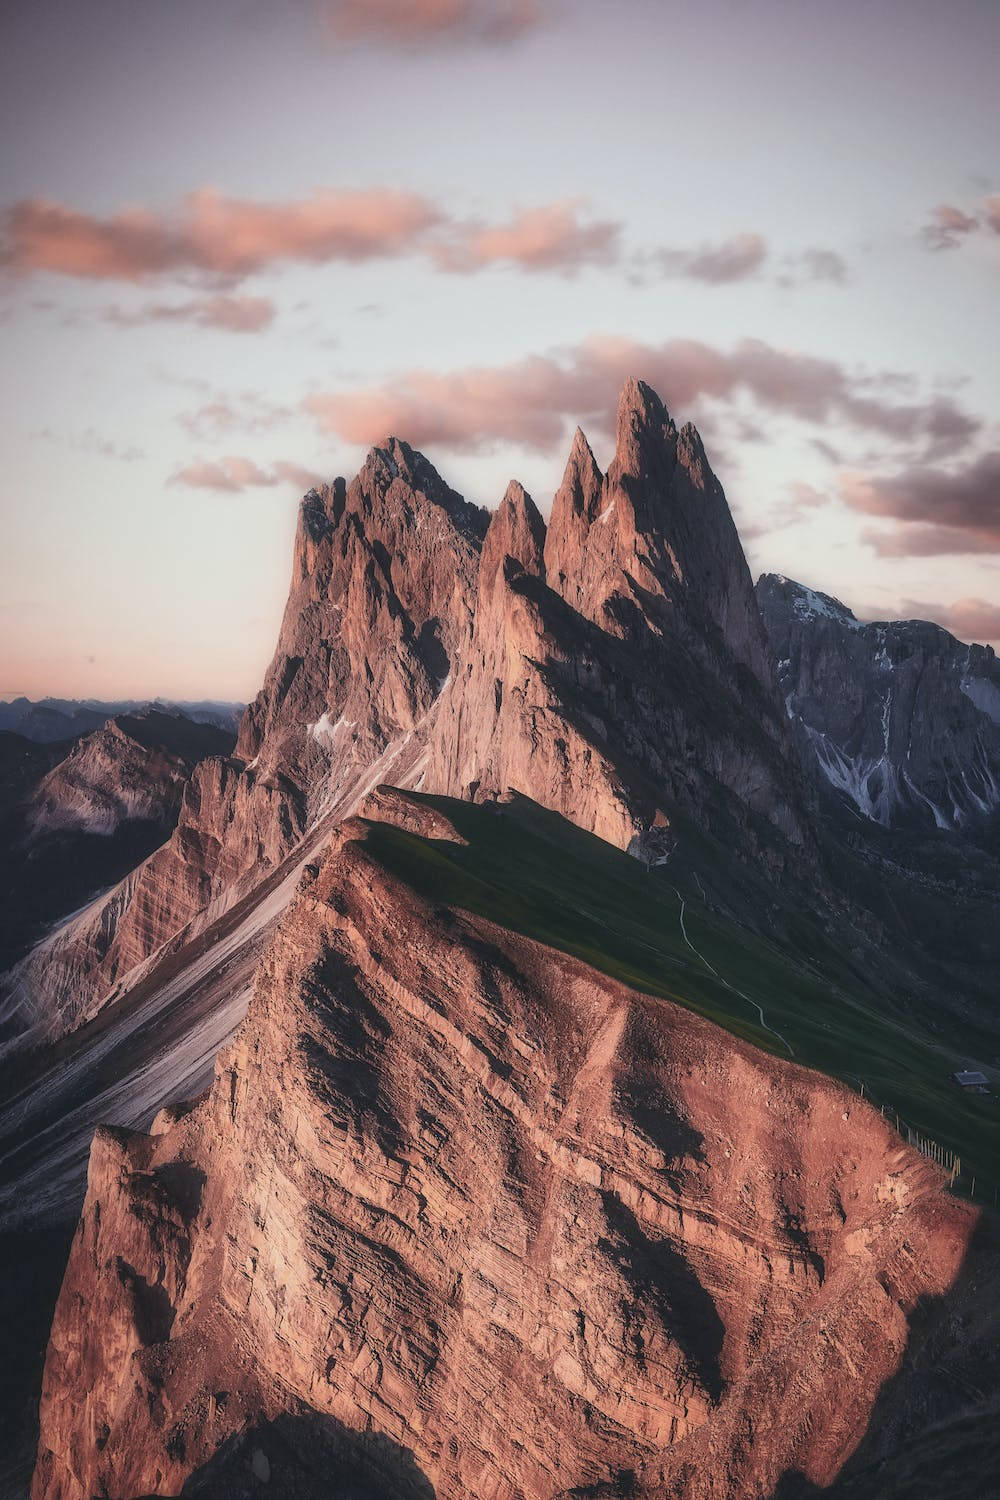 Breathtaking 4k Display Of Majestic Mountains On Iphone 11 Pro Wallpaper